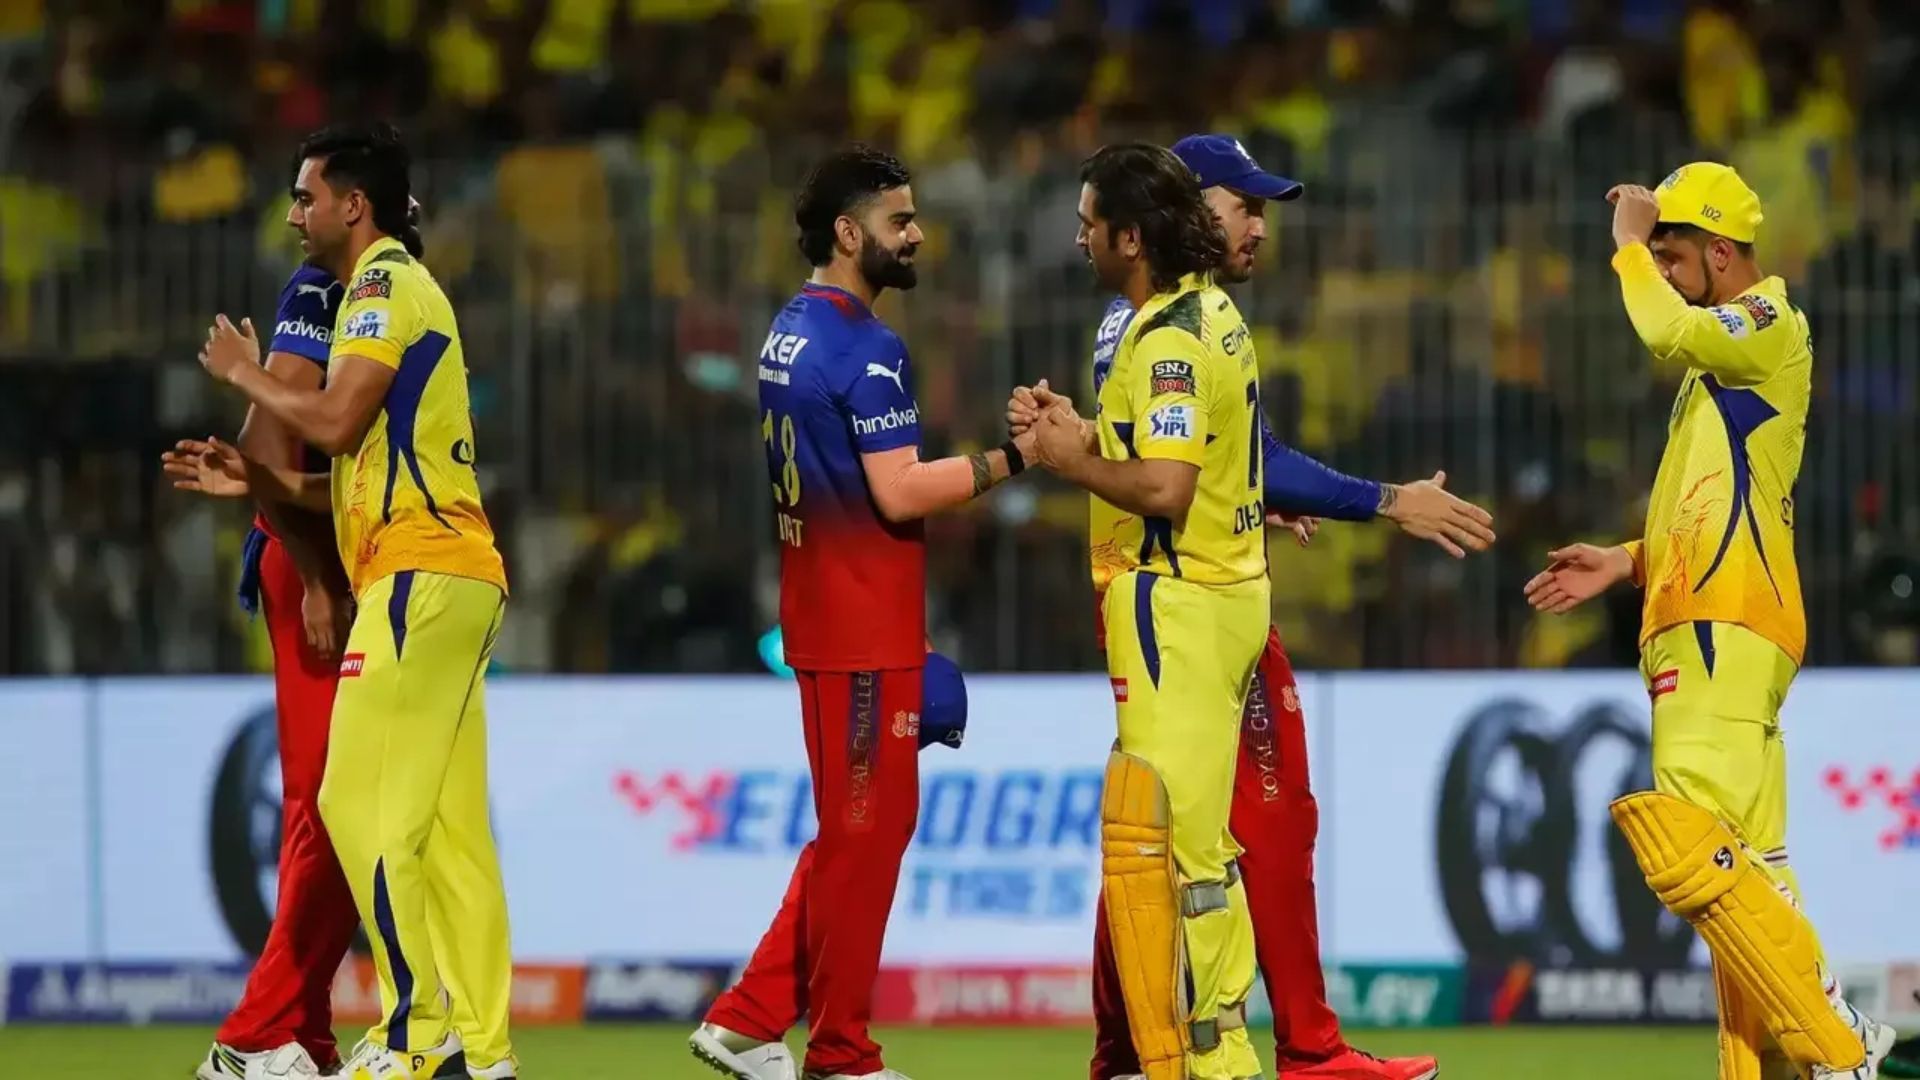 Bengaluru Man Loses ₹3 lakh After Buying Tickets For CSK Vs RCB IPL Match